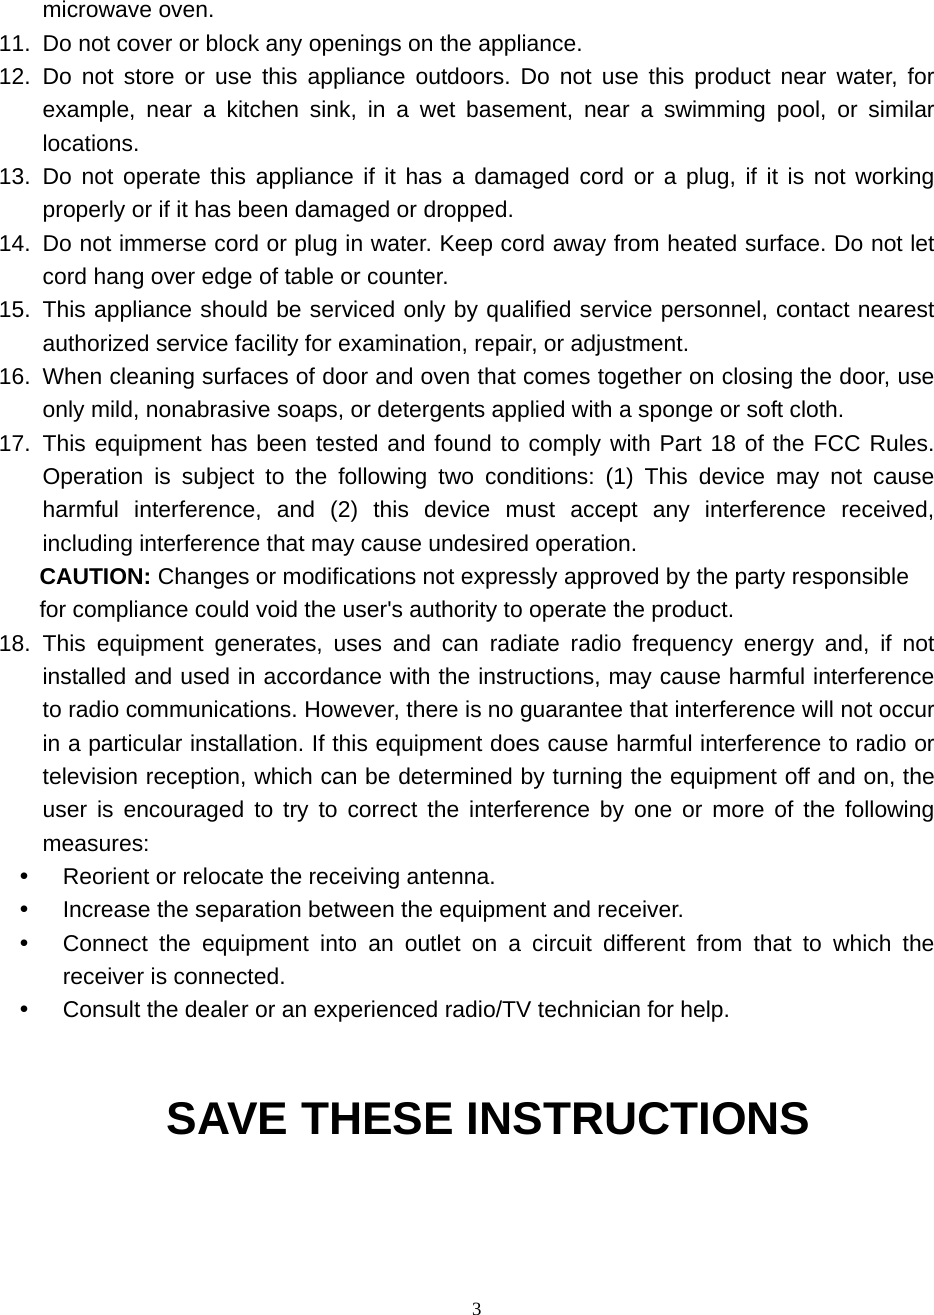 3 microwave oven. 11.  Do not cover or block any openings on the appliance. 12. Do not store or use this appliance outdoors. Do not use this product near water, for example, near a kitchen sink, in a wet basement, near a swimming pool, or similar locations. 13. Do not operate this appliance if it has a damaged cord or a plug, if it is not working properly or if it has been damaged or dropped. 14.  Do not immerse cord or plug in water. Keep cord away from heated surface. Do not let cord hang over edge of table or counter. 15.  This appliance should be serviced only by qualified service personnel, contact nearest authorized service facility for examination, repair, or adjustment. 16.  When cleaning surfaces of door and oven that comes together on closing the door, use only mild, nonabrasive soaps, or detergents applied with a sponge or soft cloth. 17. This equipment has been tested and found to comply with Part 18 of the FCC Rules. Operation is subject to the following two conditions: (1) This device may not cause harmful interference, and (2) this device must accept any interference received, including interference that may cause undesired operation. CAUTION: Changes or modifications not expressly approved by the party responsible for compliance could void the user&apos;s authority to operate the product. 18. This equipment generates, uses and can radiate radio frequency energy and, if not installed and used in accordance with the instructions, may cause harmful interference to radio communications. However, there is no guarantee that interference will not occur in a particular installation. If this equipment does cause harmful interference to radio or television reception, which can be determined by turning the equipment off and on, the user is encouraged to try to correct the interference by one or more of the following measures:    Reorient or relocate the receiving antenna.     Increase the separation between the equipment and receiver.     Connect the equipment into an outlet on a circuit different from that to which the receiver is connected.   Consult the dealer or an experienced radio/TV technician for help.   SAVE THESE INSTRUCTIONS     